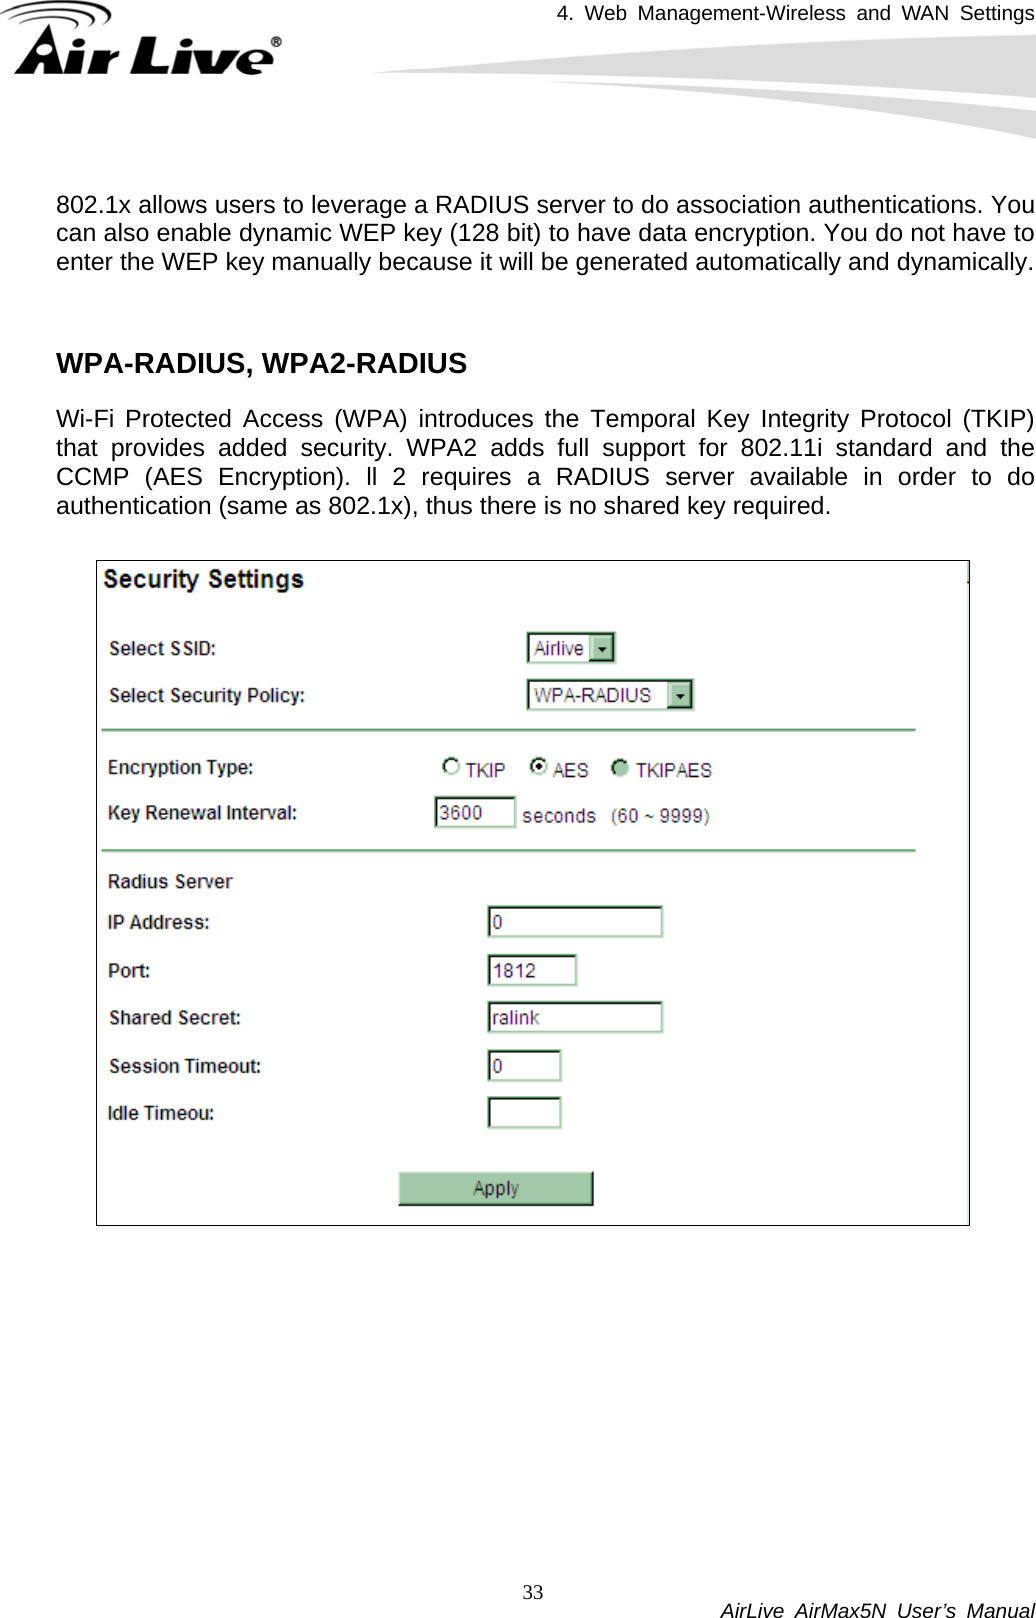 4. Web Management-Wireless and WAN Settings           AirLive AirMax5N User’s Manual 33 802.1x allows users to leverage a RADIUS server to do association authentications. You can also enable dynamic WEP key (128 bit) to have data encryption. You do not have to enter the WEP key manually because it will be generated automatically and dynamically.     WPA-RADIUS, WPA2-RADIUS Wi-Fi Protected Access (WPA) introduces the Temporal Key Integrity Protocol (TKIP) that provides added security. WPA2 adds full support for 802.11i standard and the CCMP (AES Encryption). ll 2 requires a RADIUS server available in order to do authentication (same as 802.1x), thus there is no shared key required.      